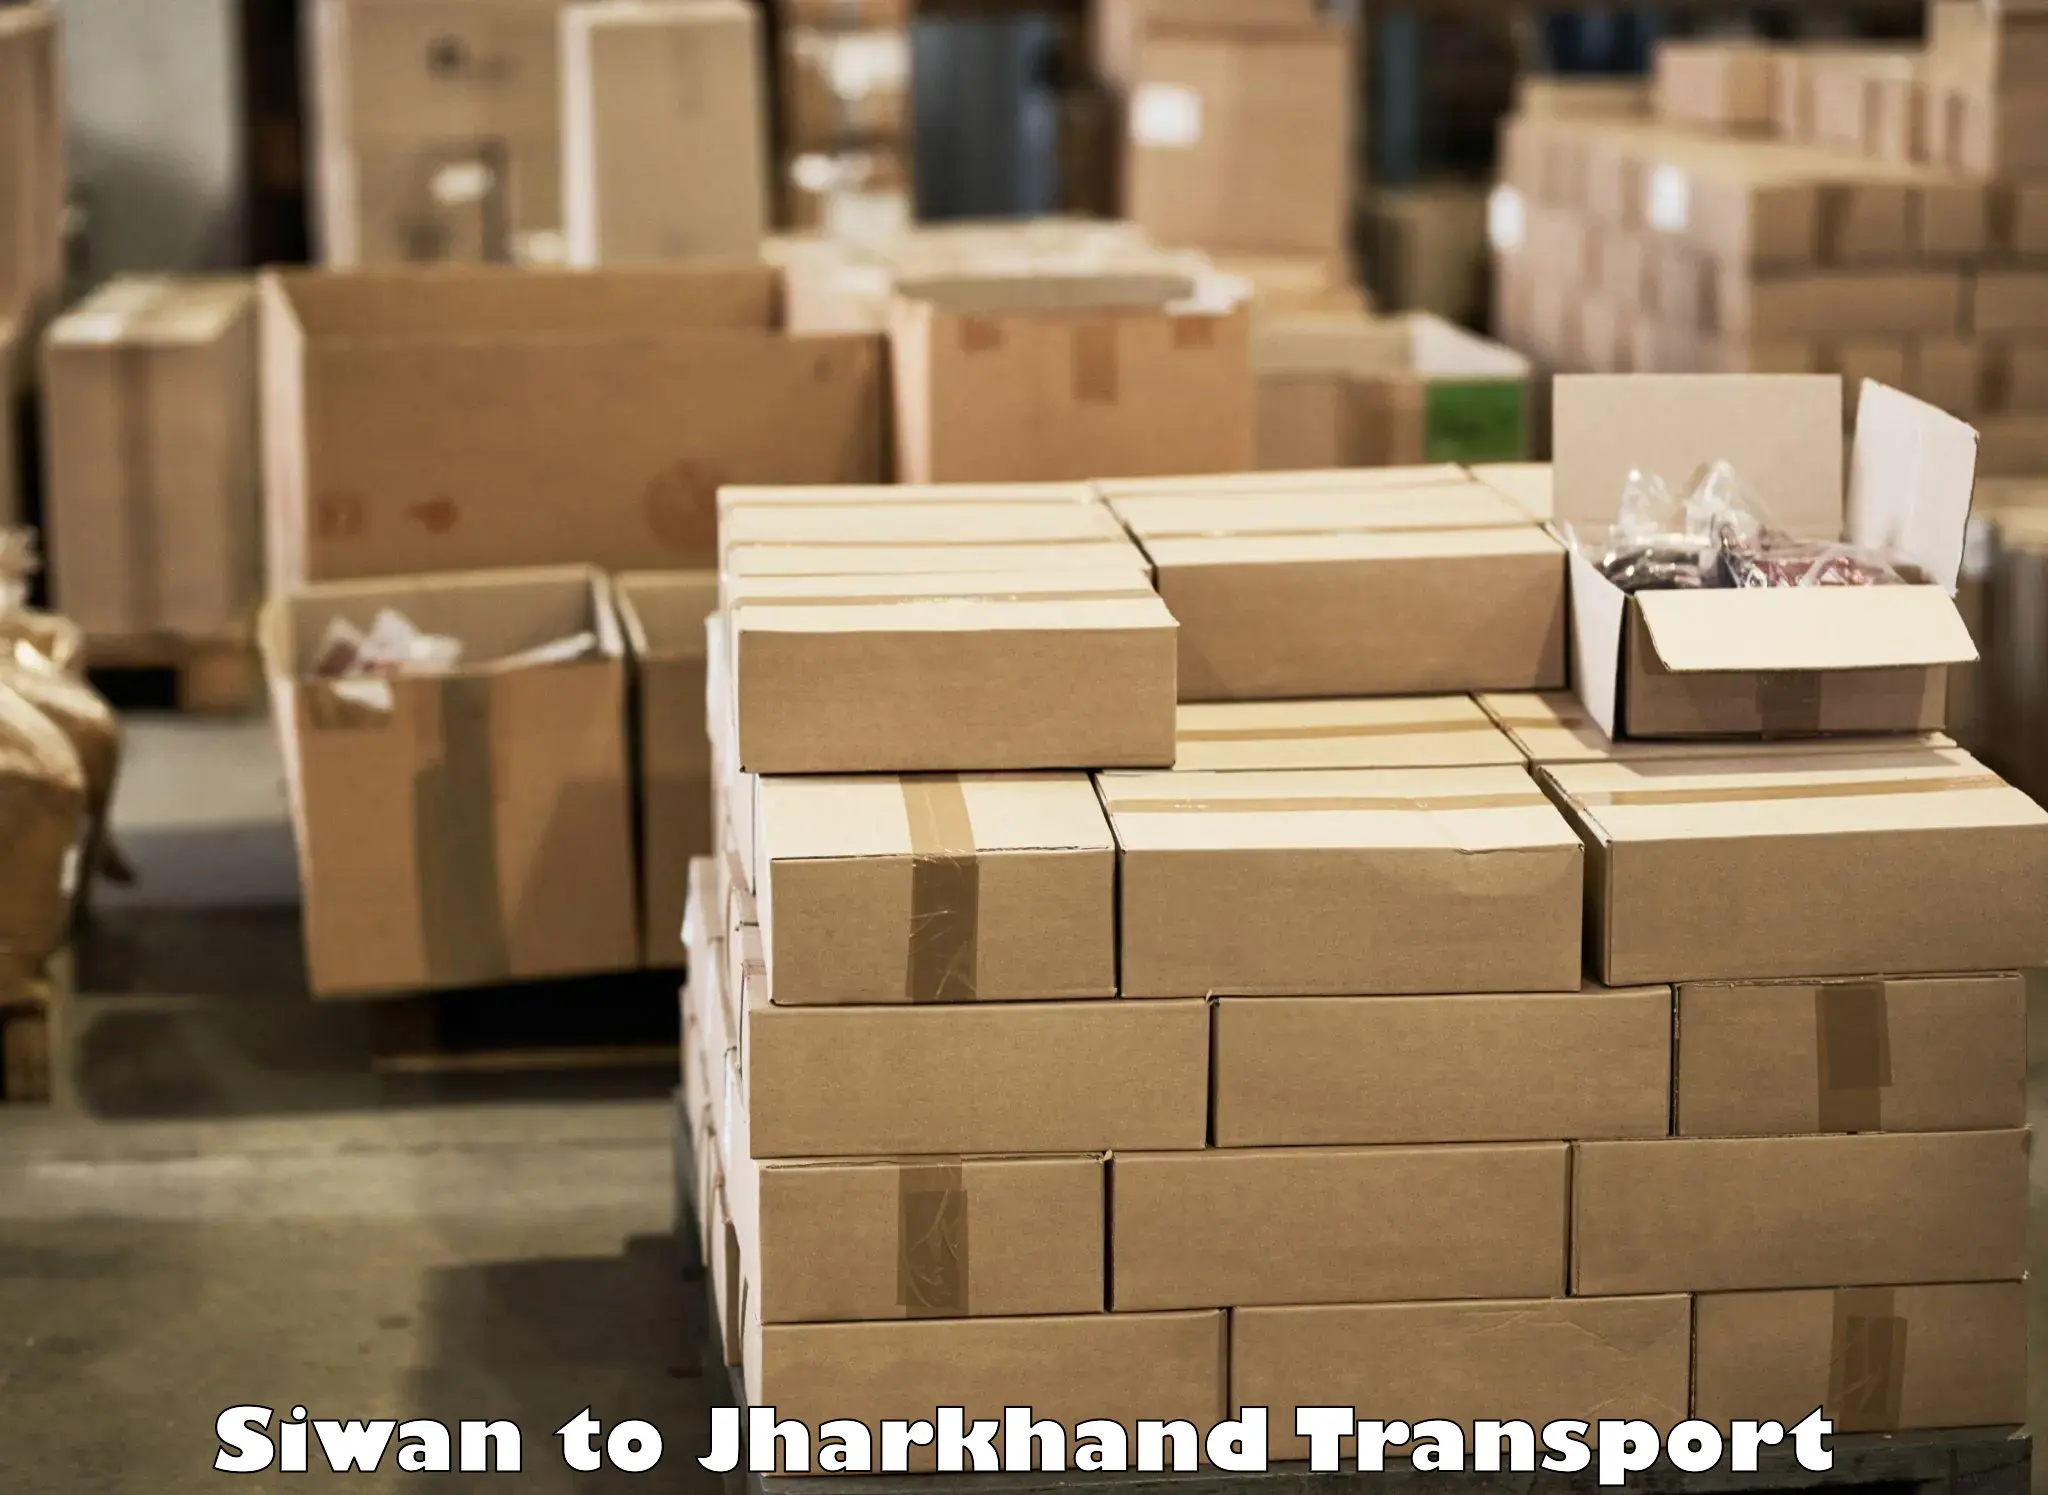 Best transport services in India Siwan to Dhanbad